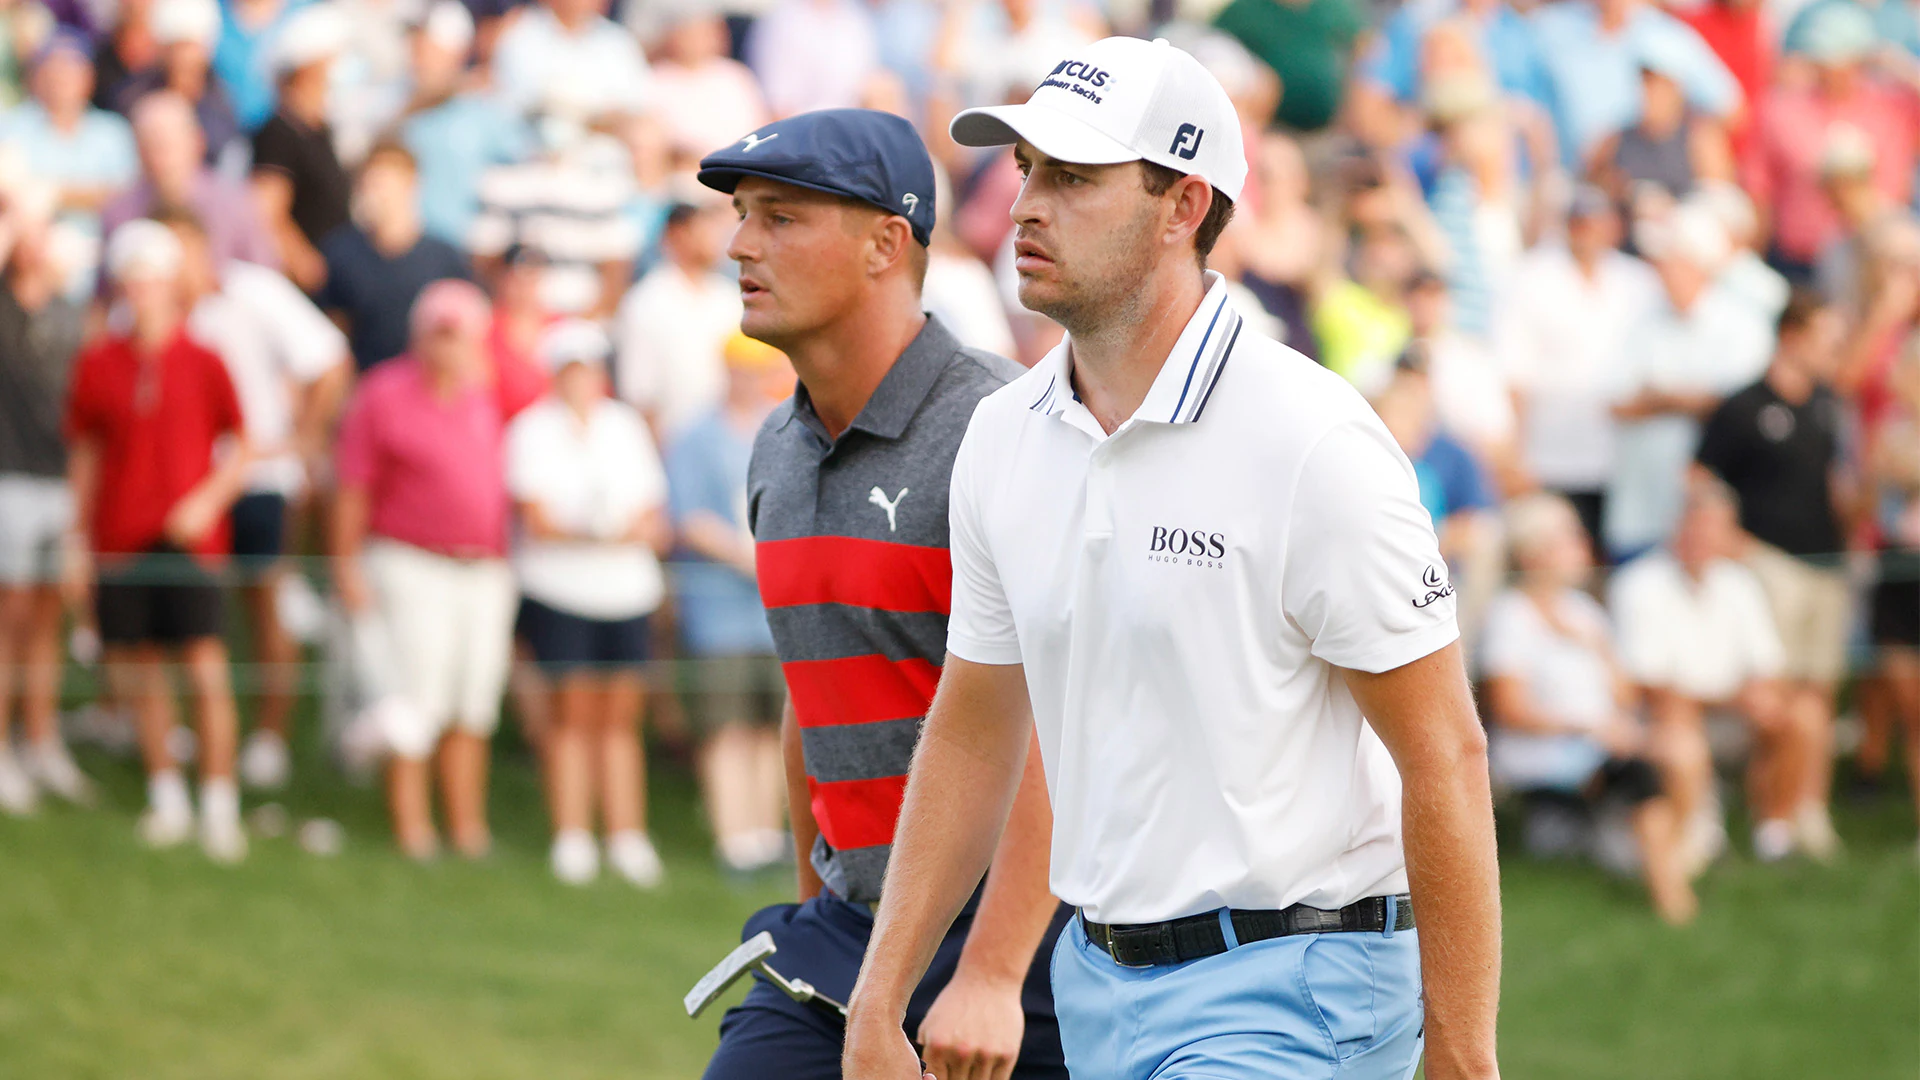 Here’s where all 30 players in the Tour Championship field will start